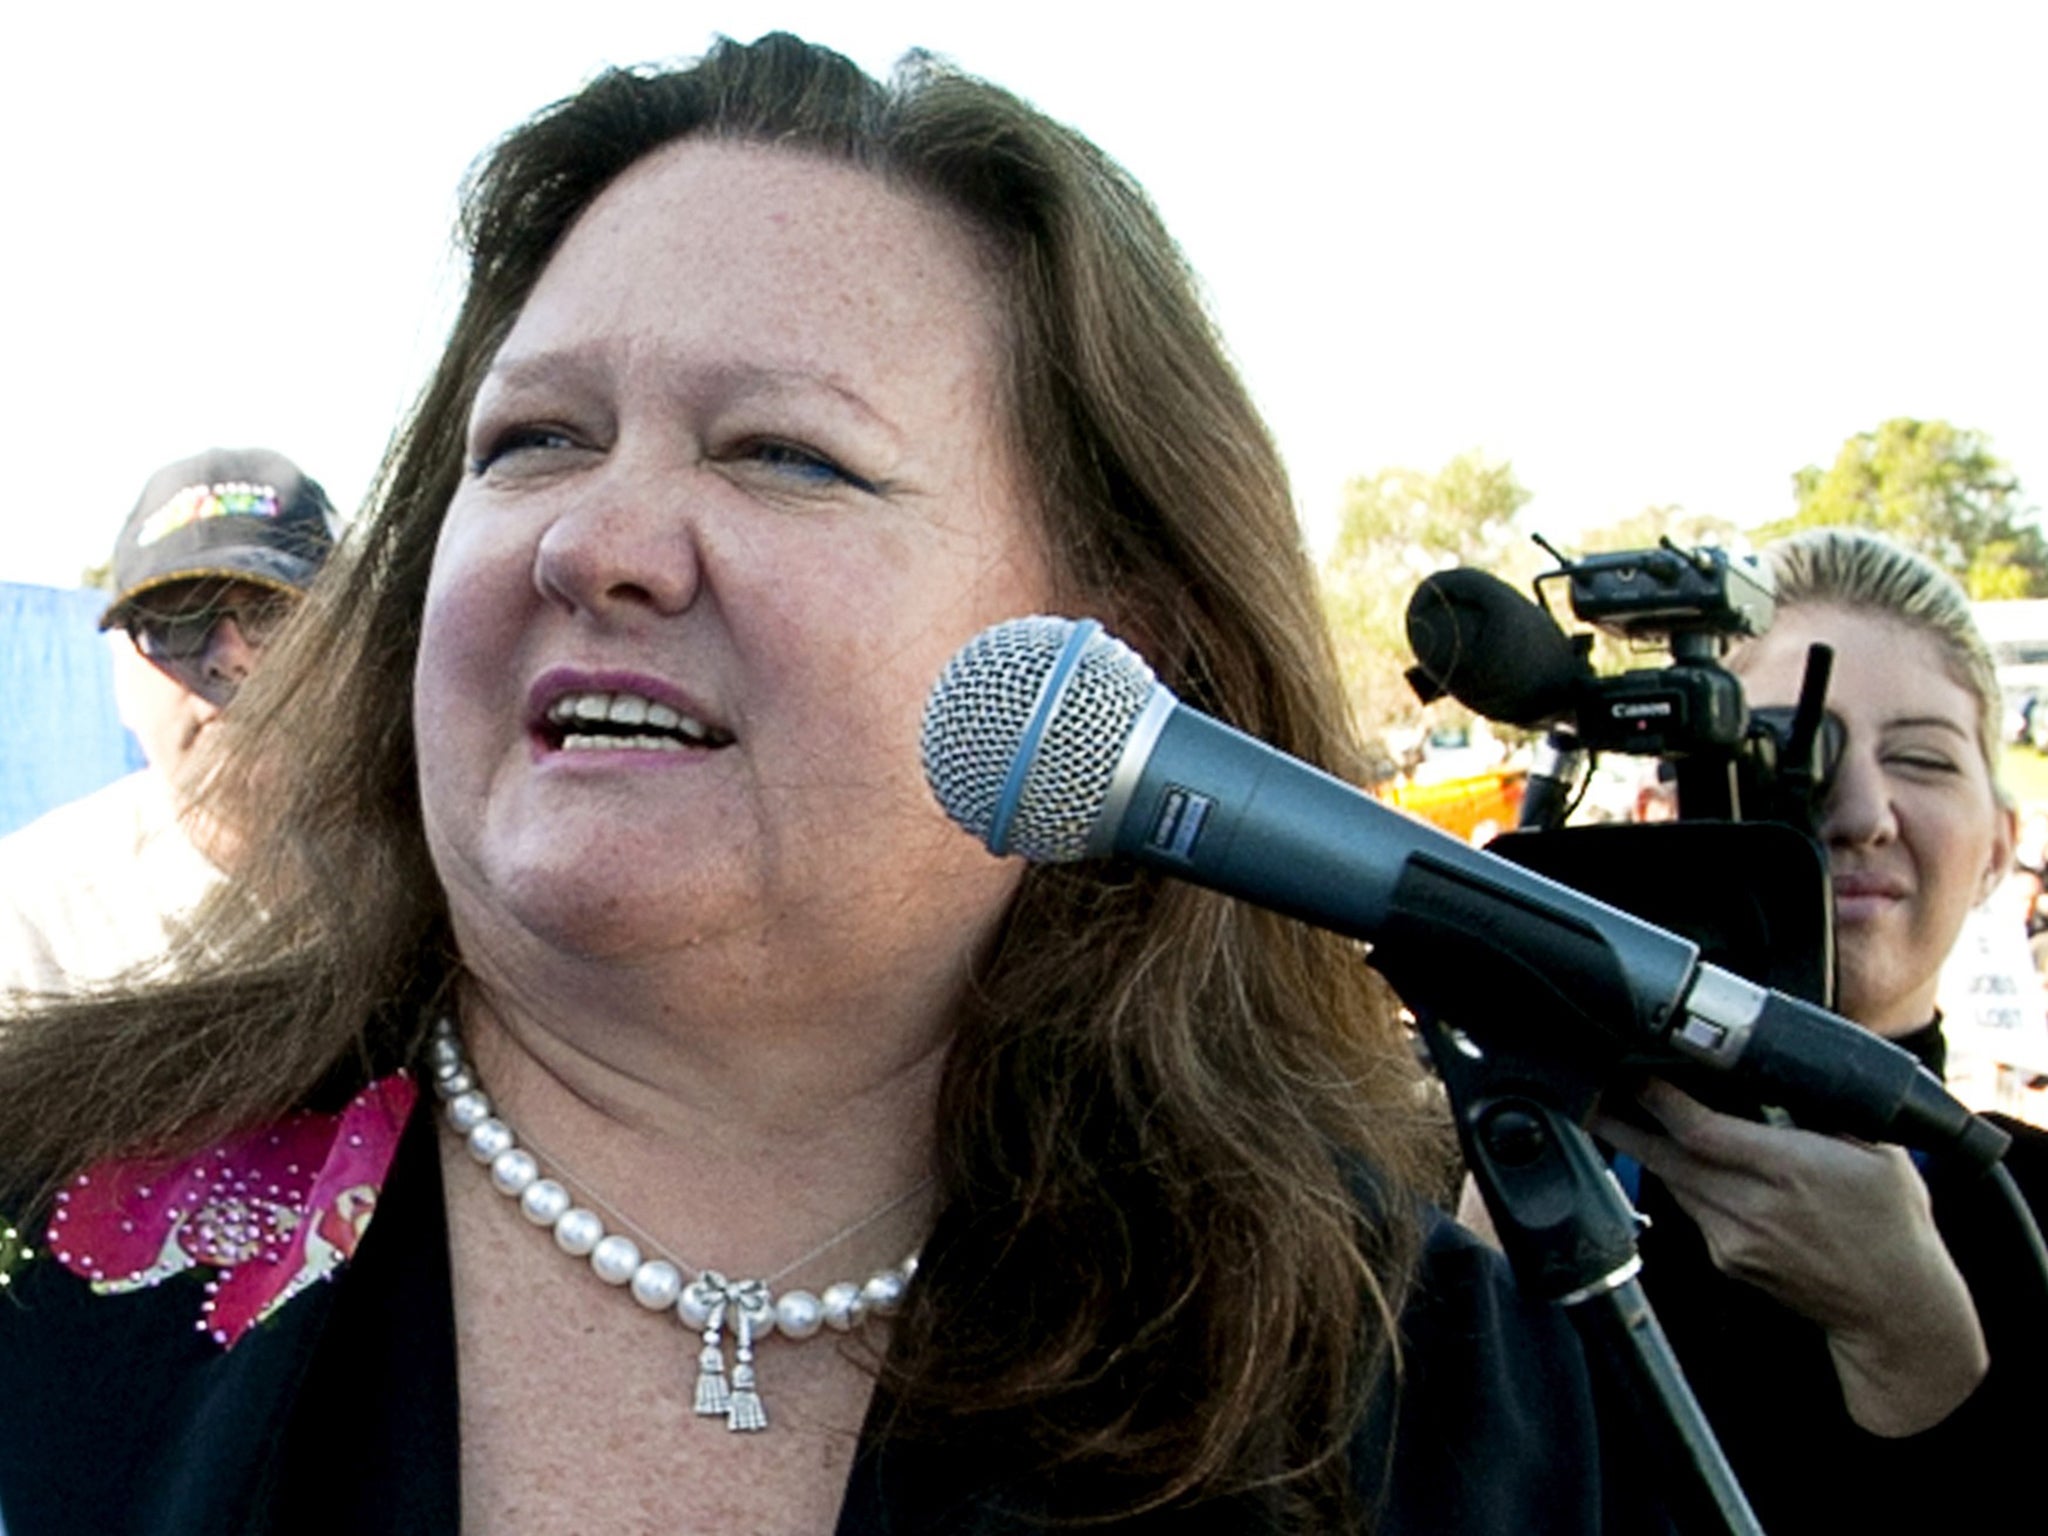 Gina Rinehart is Australia’s richest person with an estimated fortune of US$11.7bn (£7.6bn)